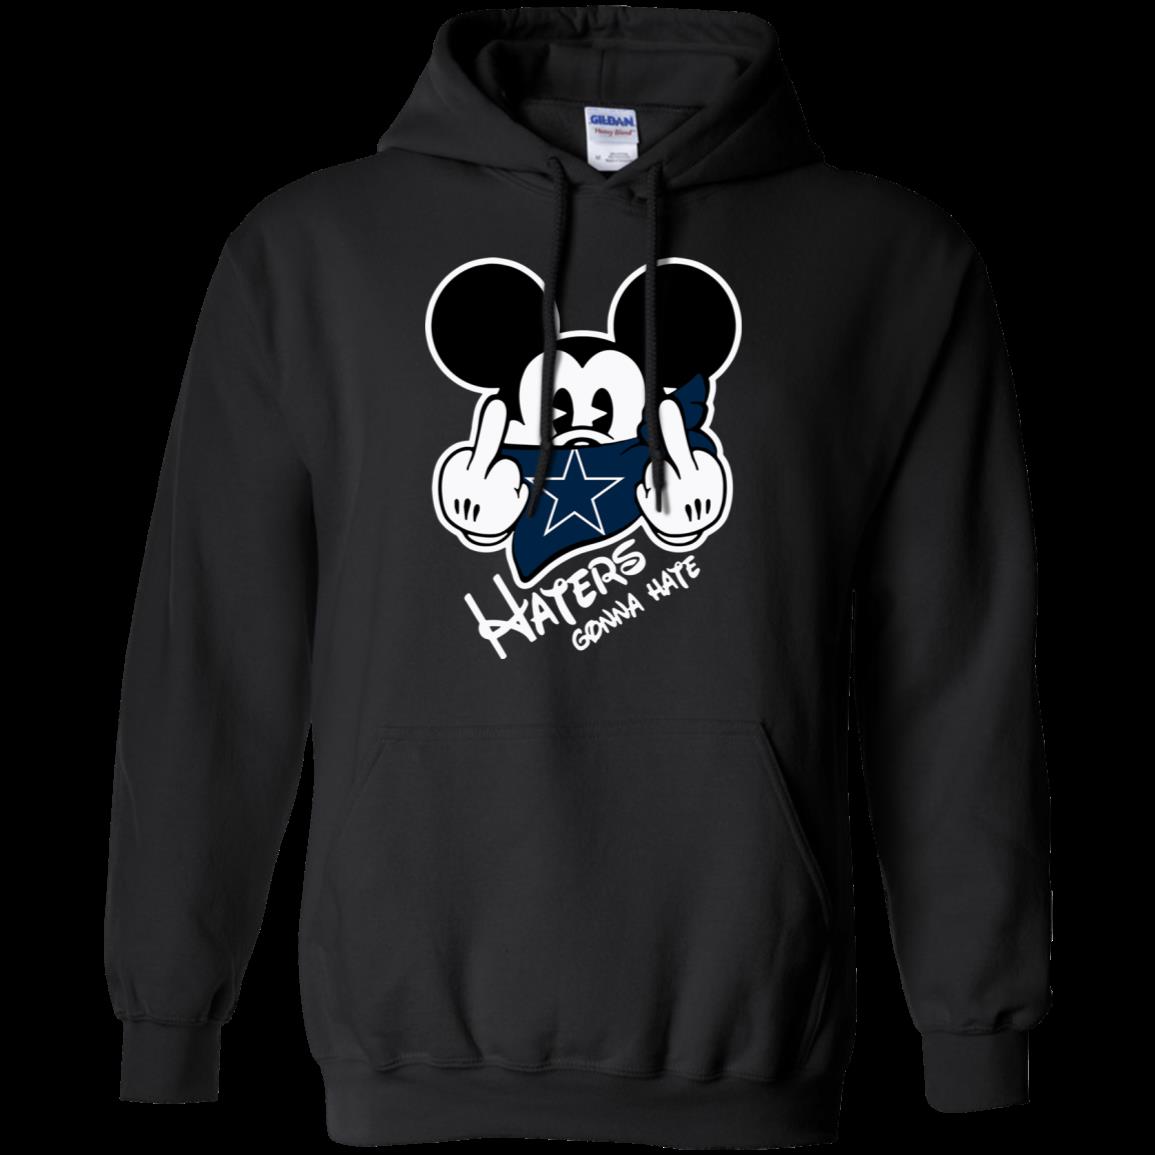 Nfl Dallas Cowboys Haters Gonna Hate Mickey Mouse Shirt Hoodie